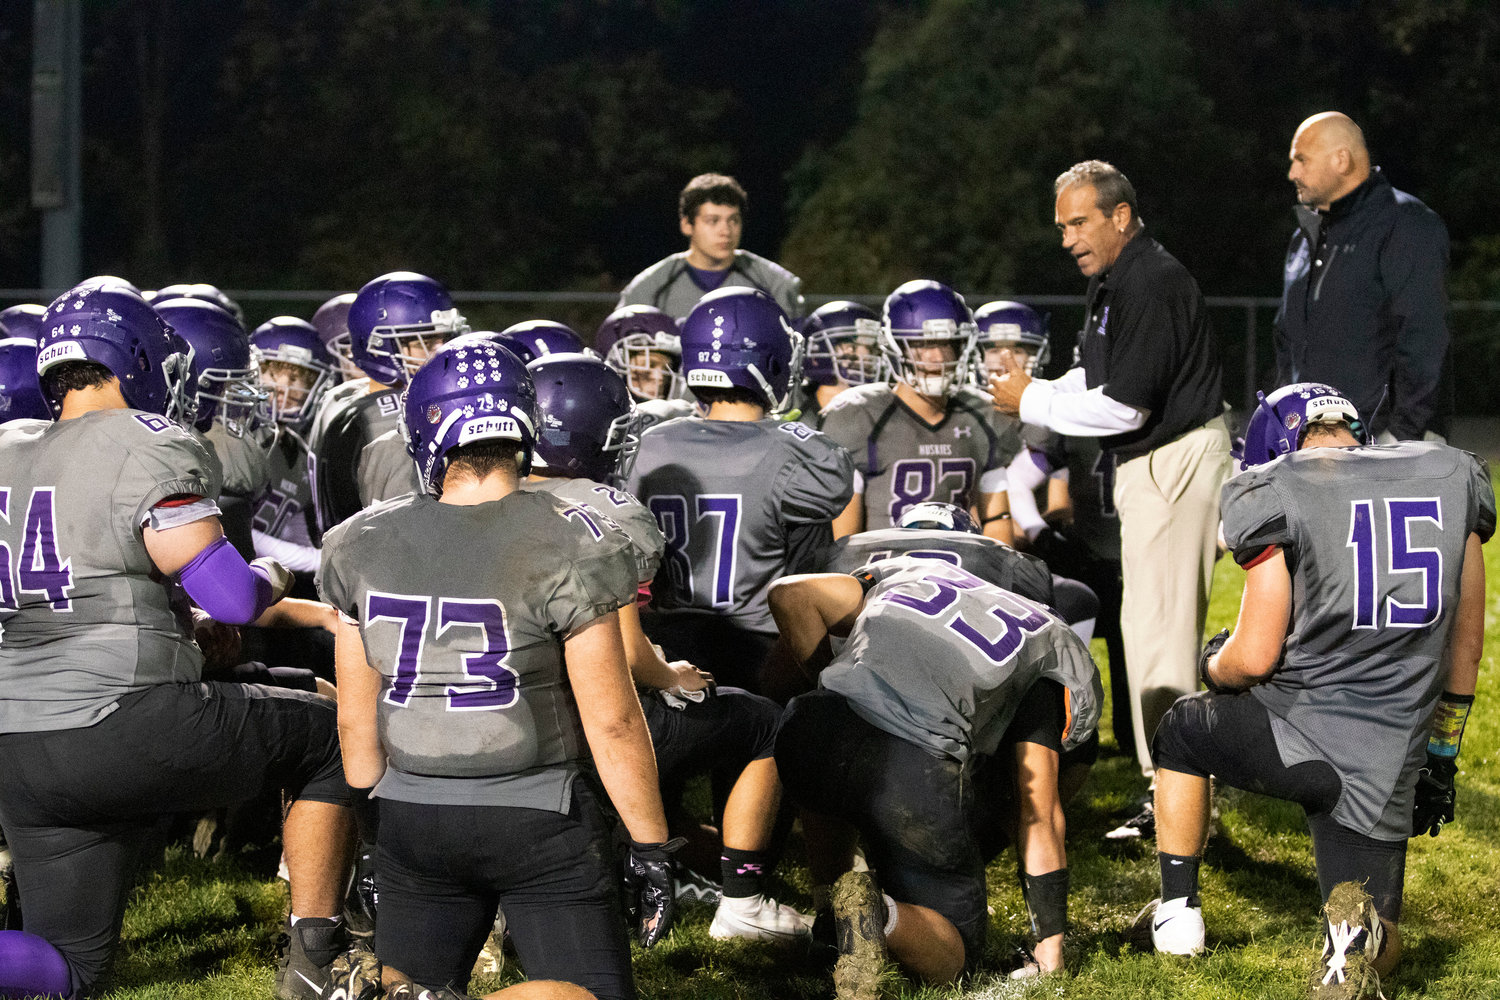 Huskies head coach Thomas DelSanto Jr. (right) speaks to the his young team after the loss.